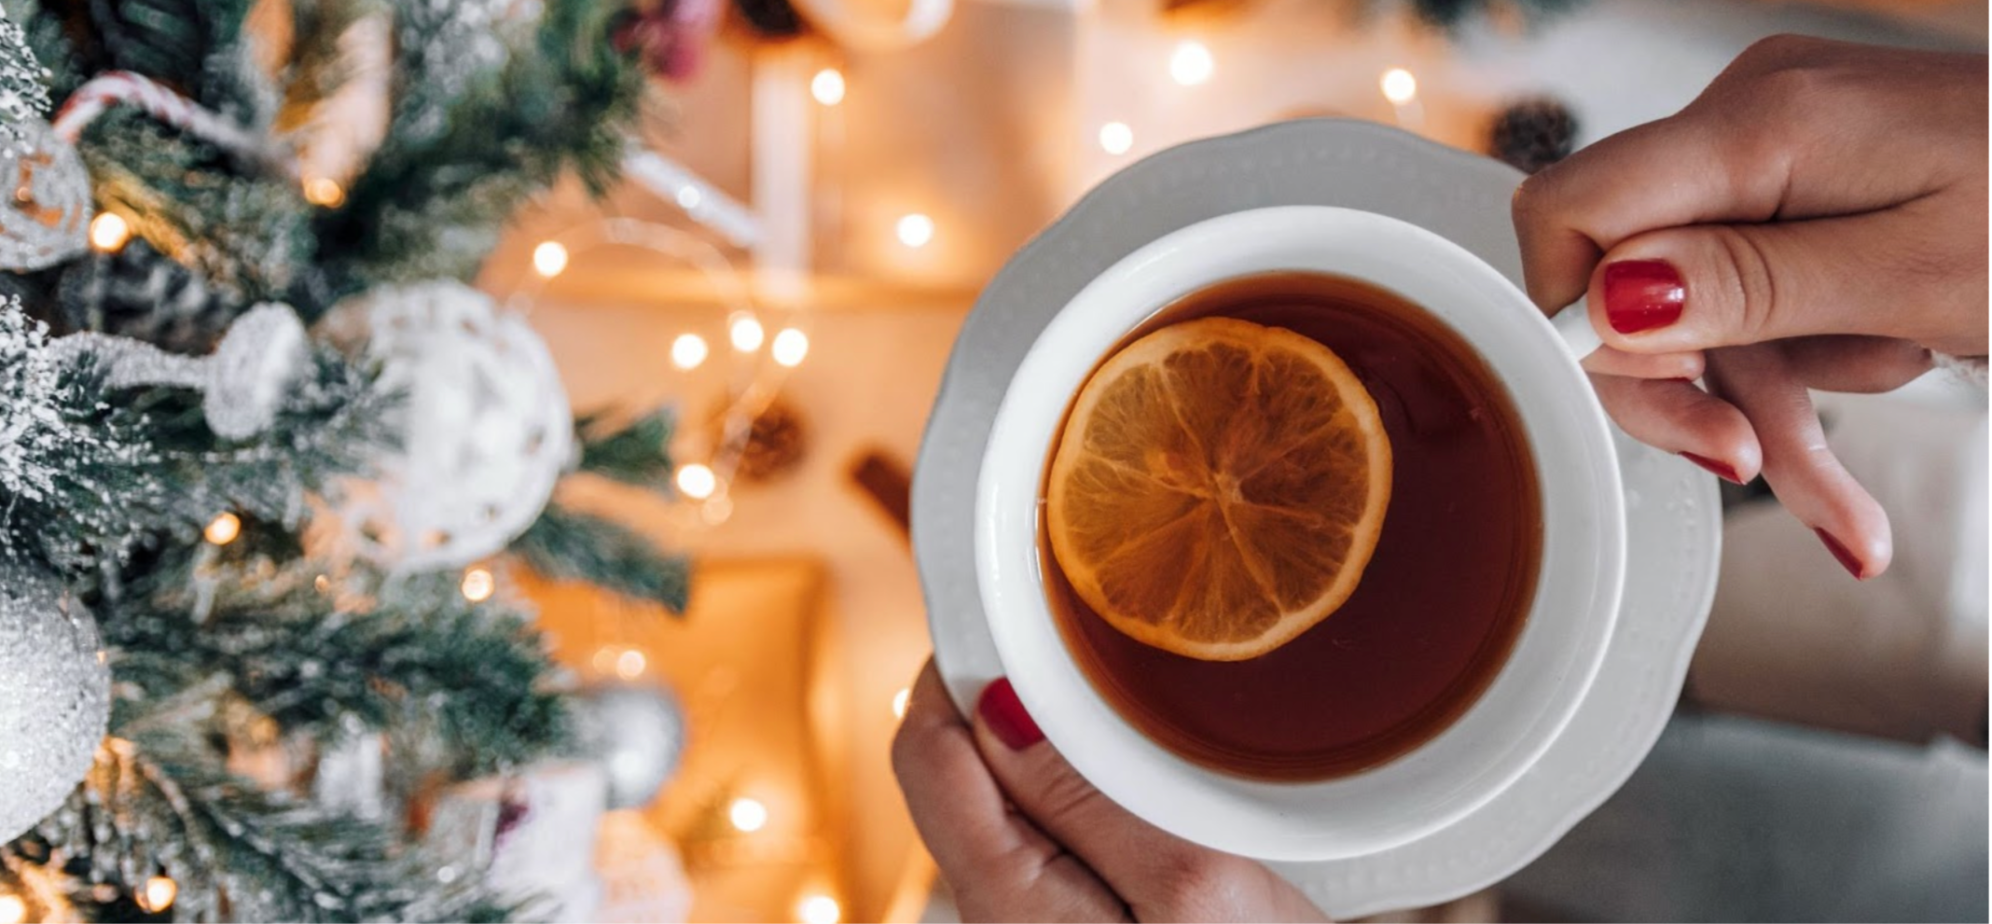 Woman holding a hot Christmas drink with an orange slice